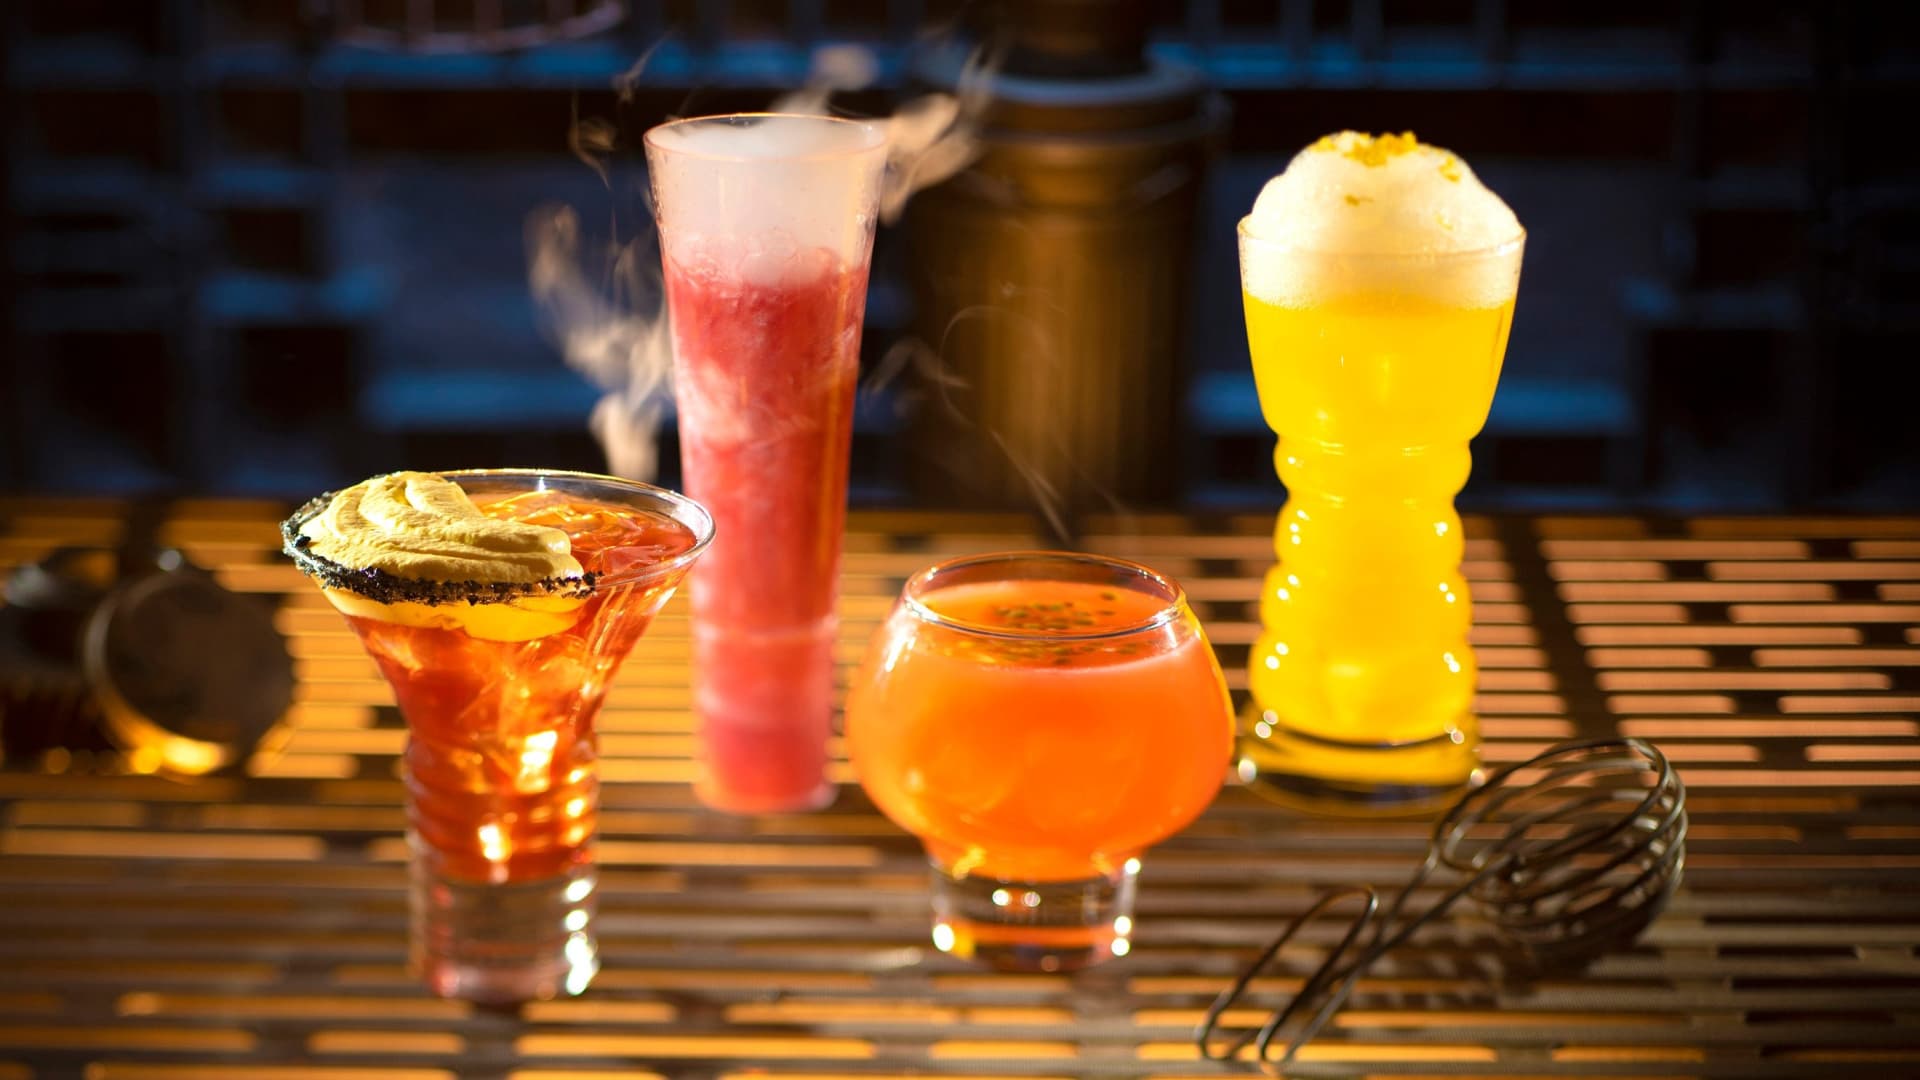 From left to right, alcoholic beverages: The Outer Rim, Bespin Fizz, Yub Nub, and Fuzzy Tauntaun can be found at Oga's Cantina in Star Wars: Galaxy's Edge at Disneyland Park in Anaheim, California and at Disney's Hollywood Studios in Lake Buena Vista, Florida.